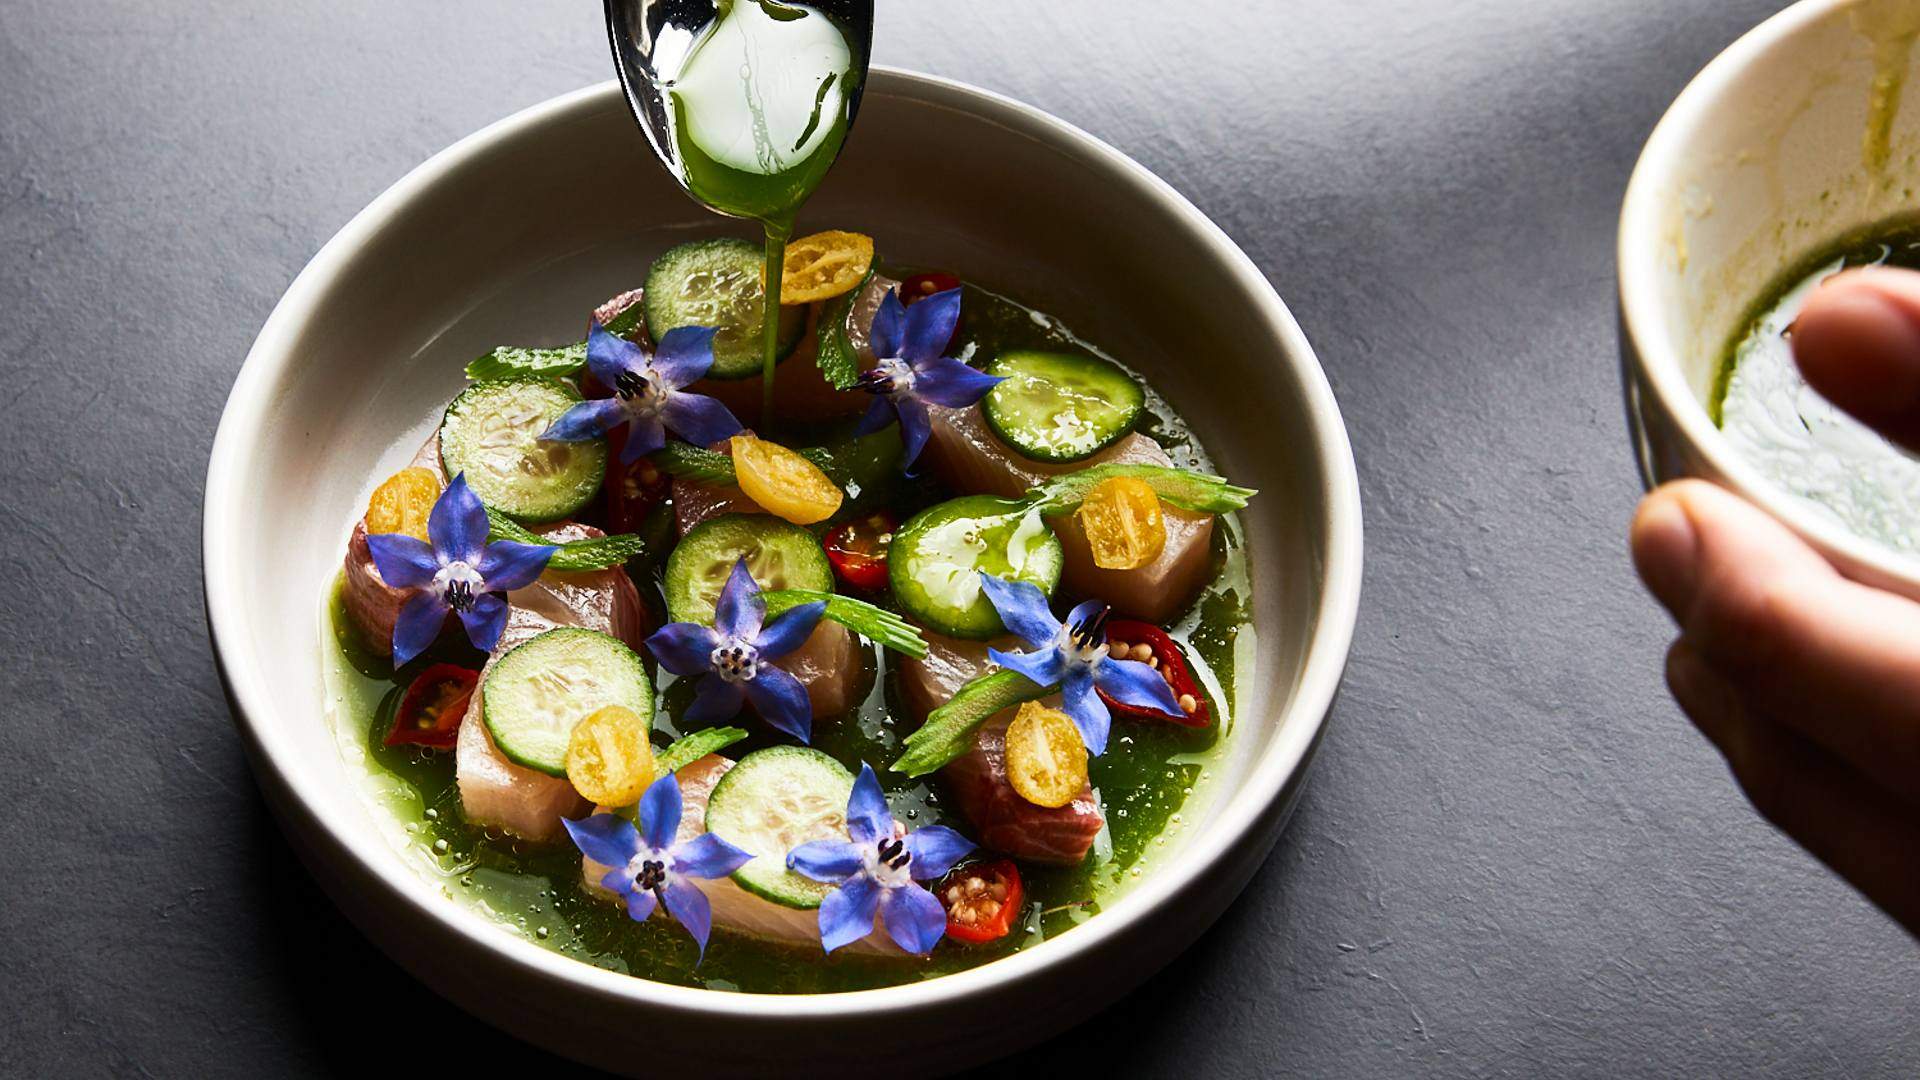 Now Open: Freyja Is Melbourne's Sophisticated 'New Nordic' Restaurant With Michelin Cred